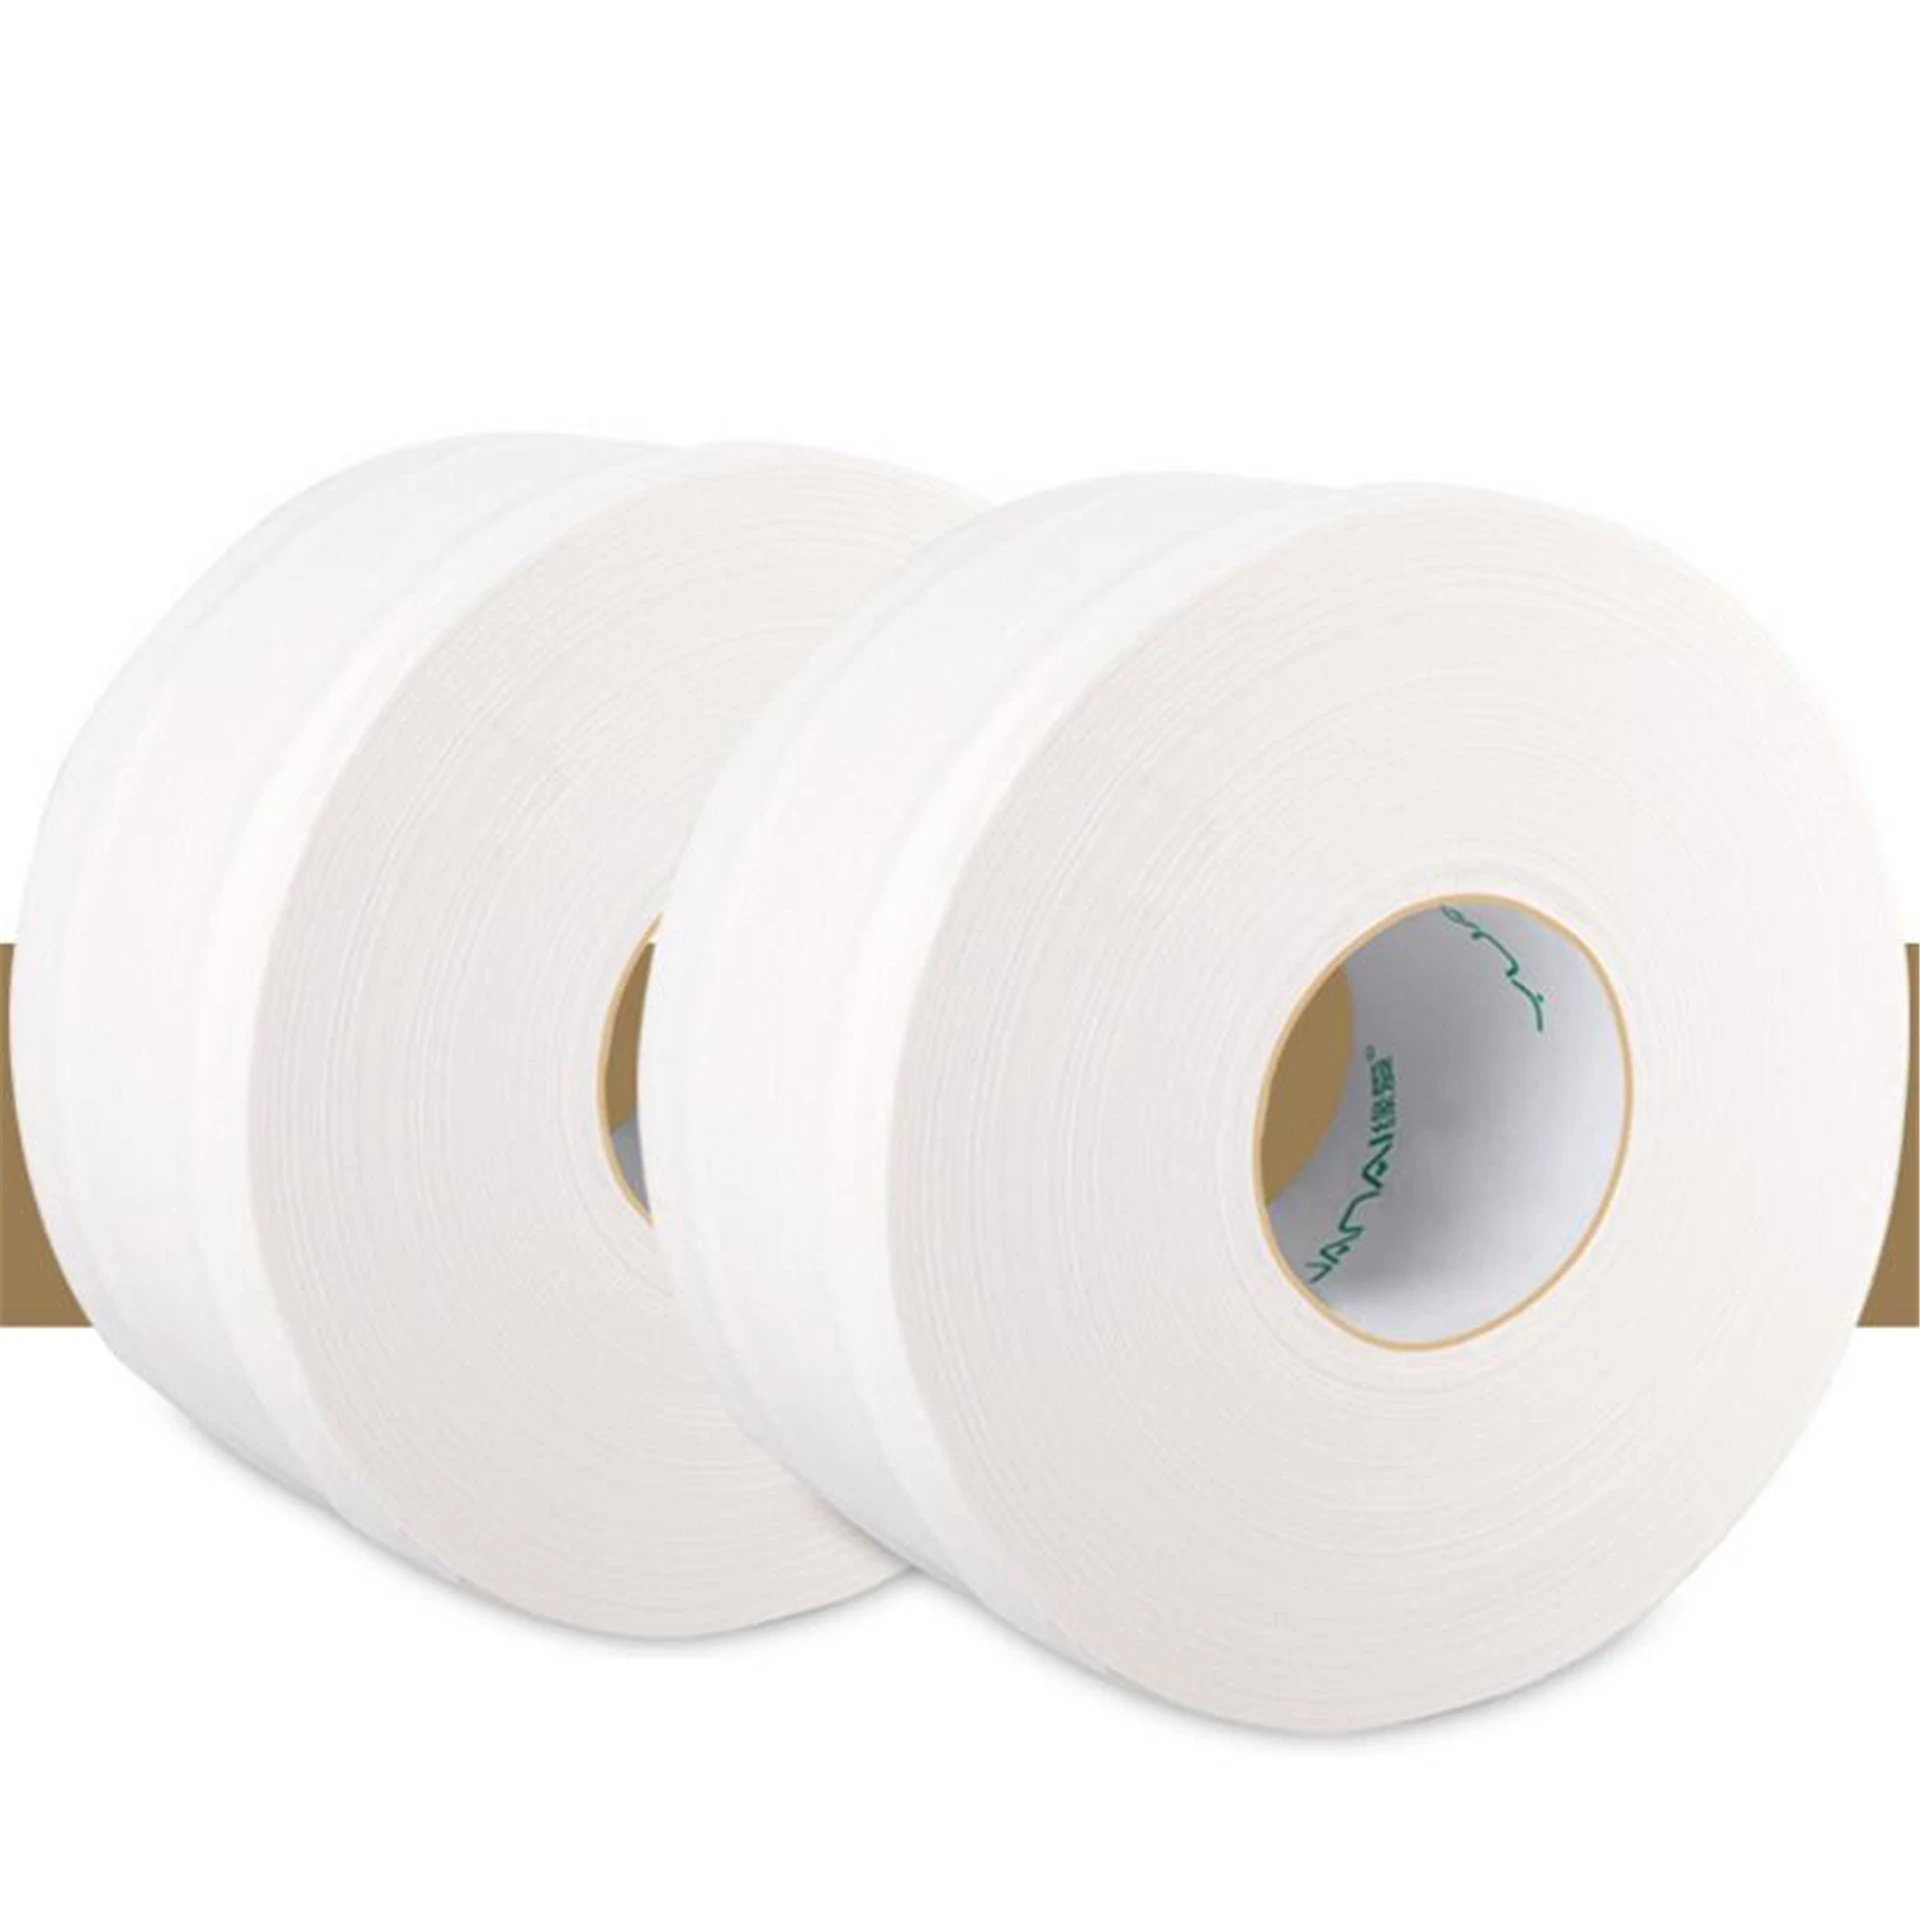 Hot sales Other Sanitary Paper high-capacity disposable paper towel